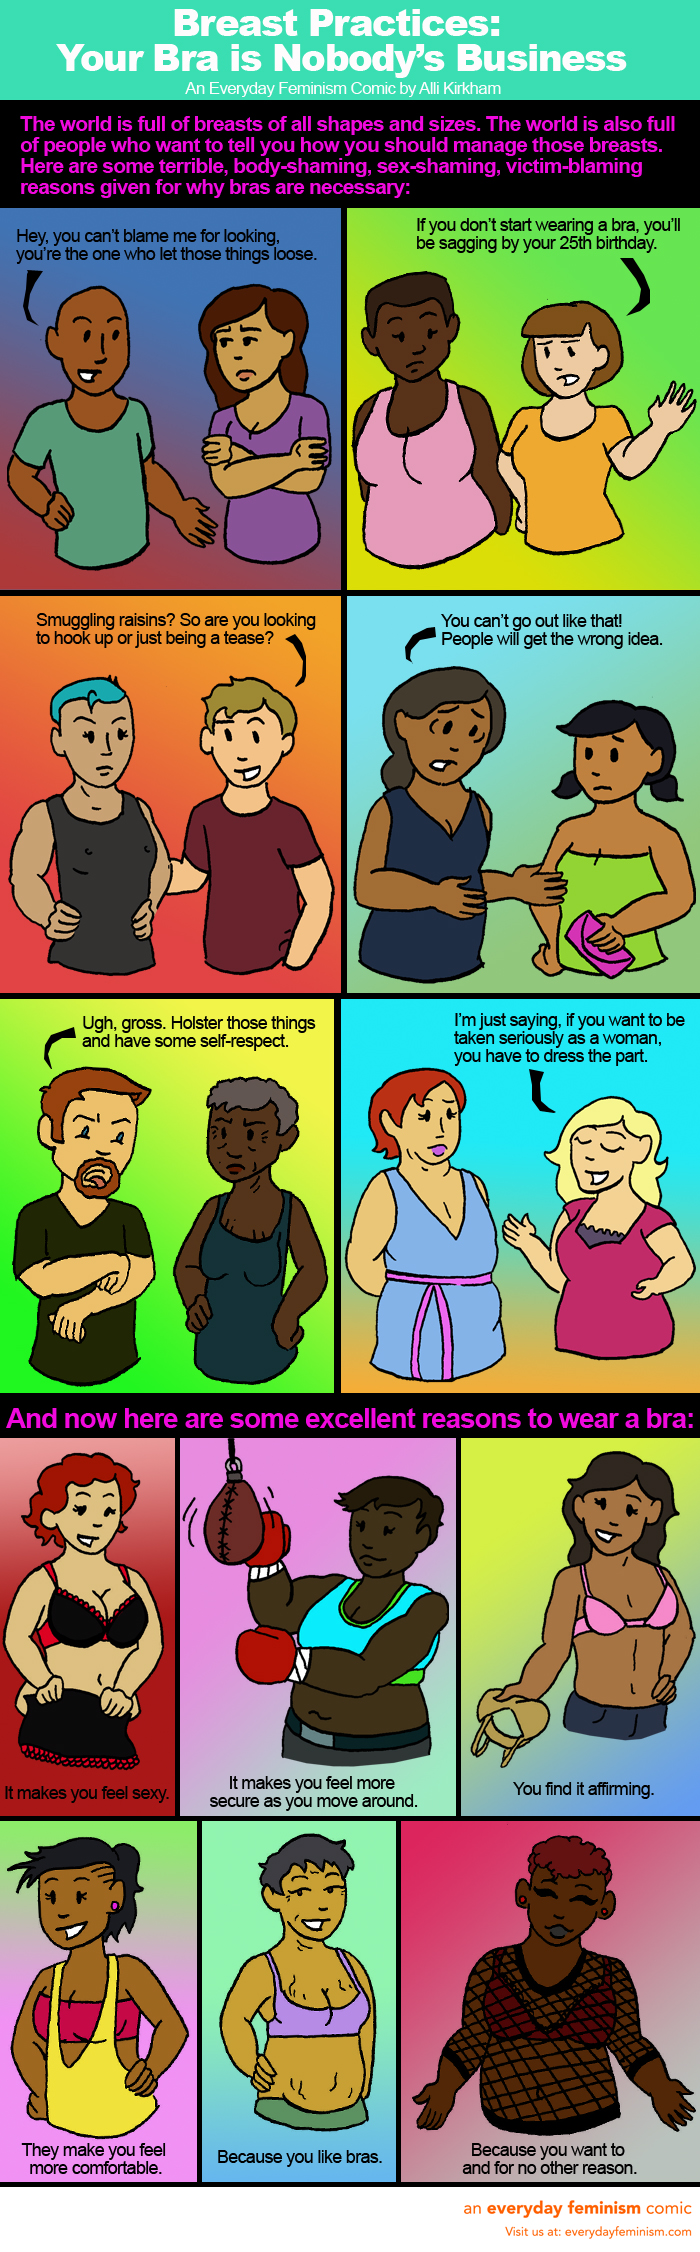 If I didn't wear a bra, would people notice? - Quora